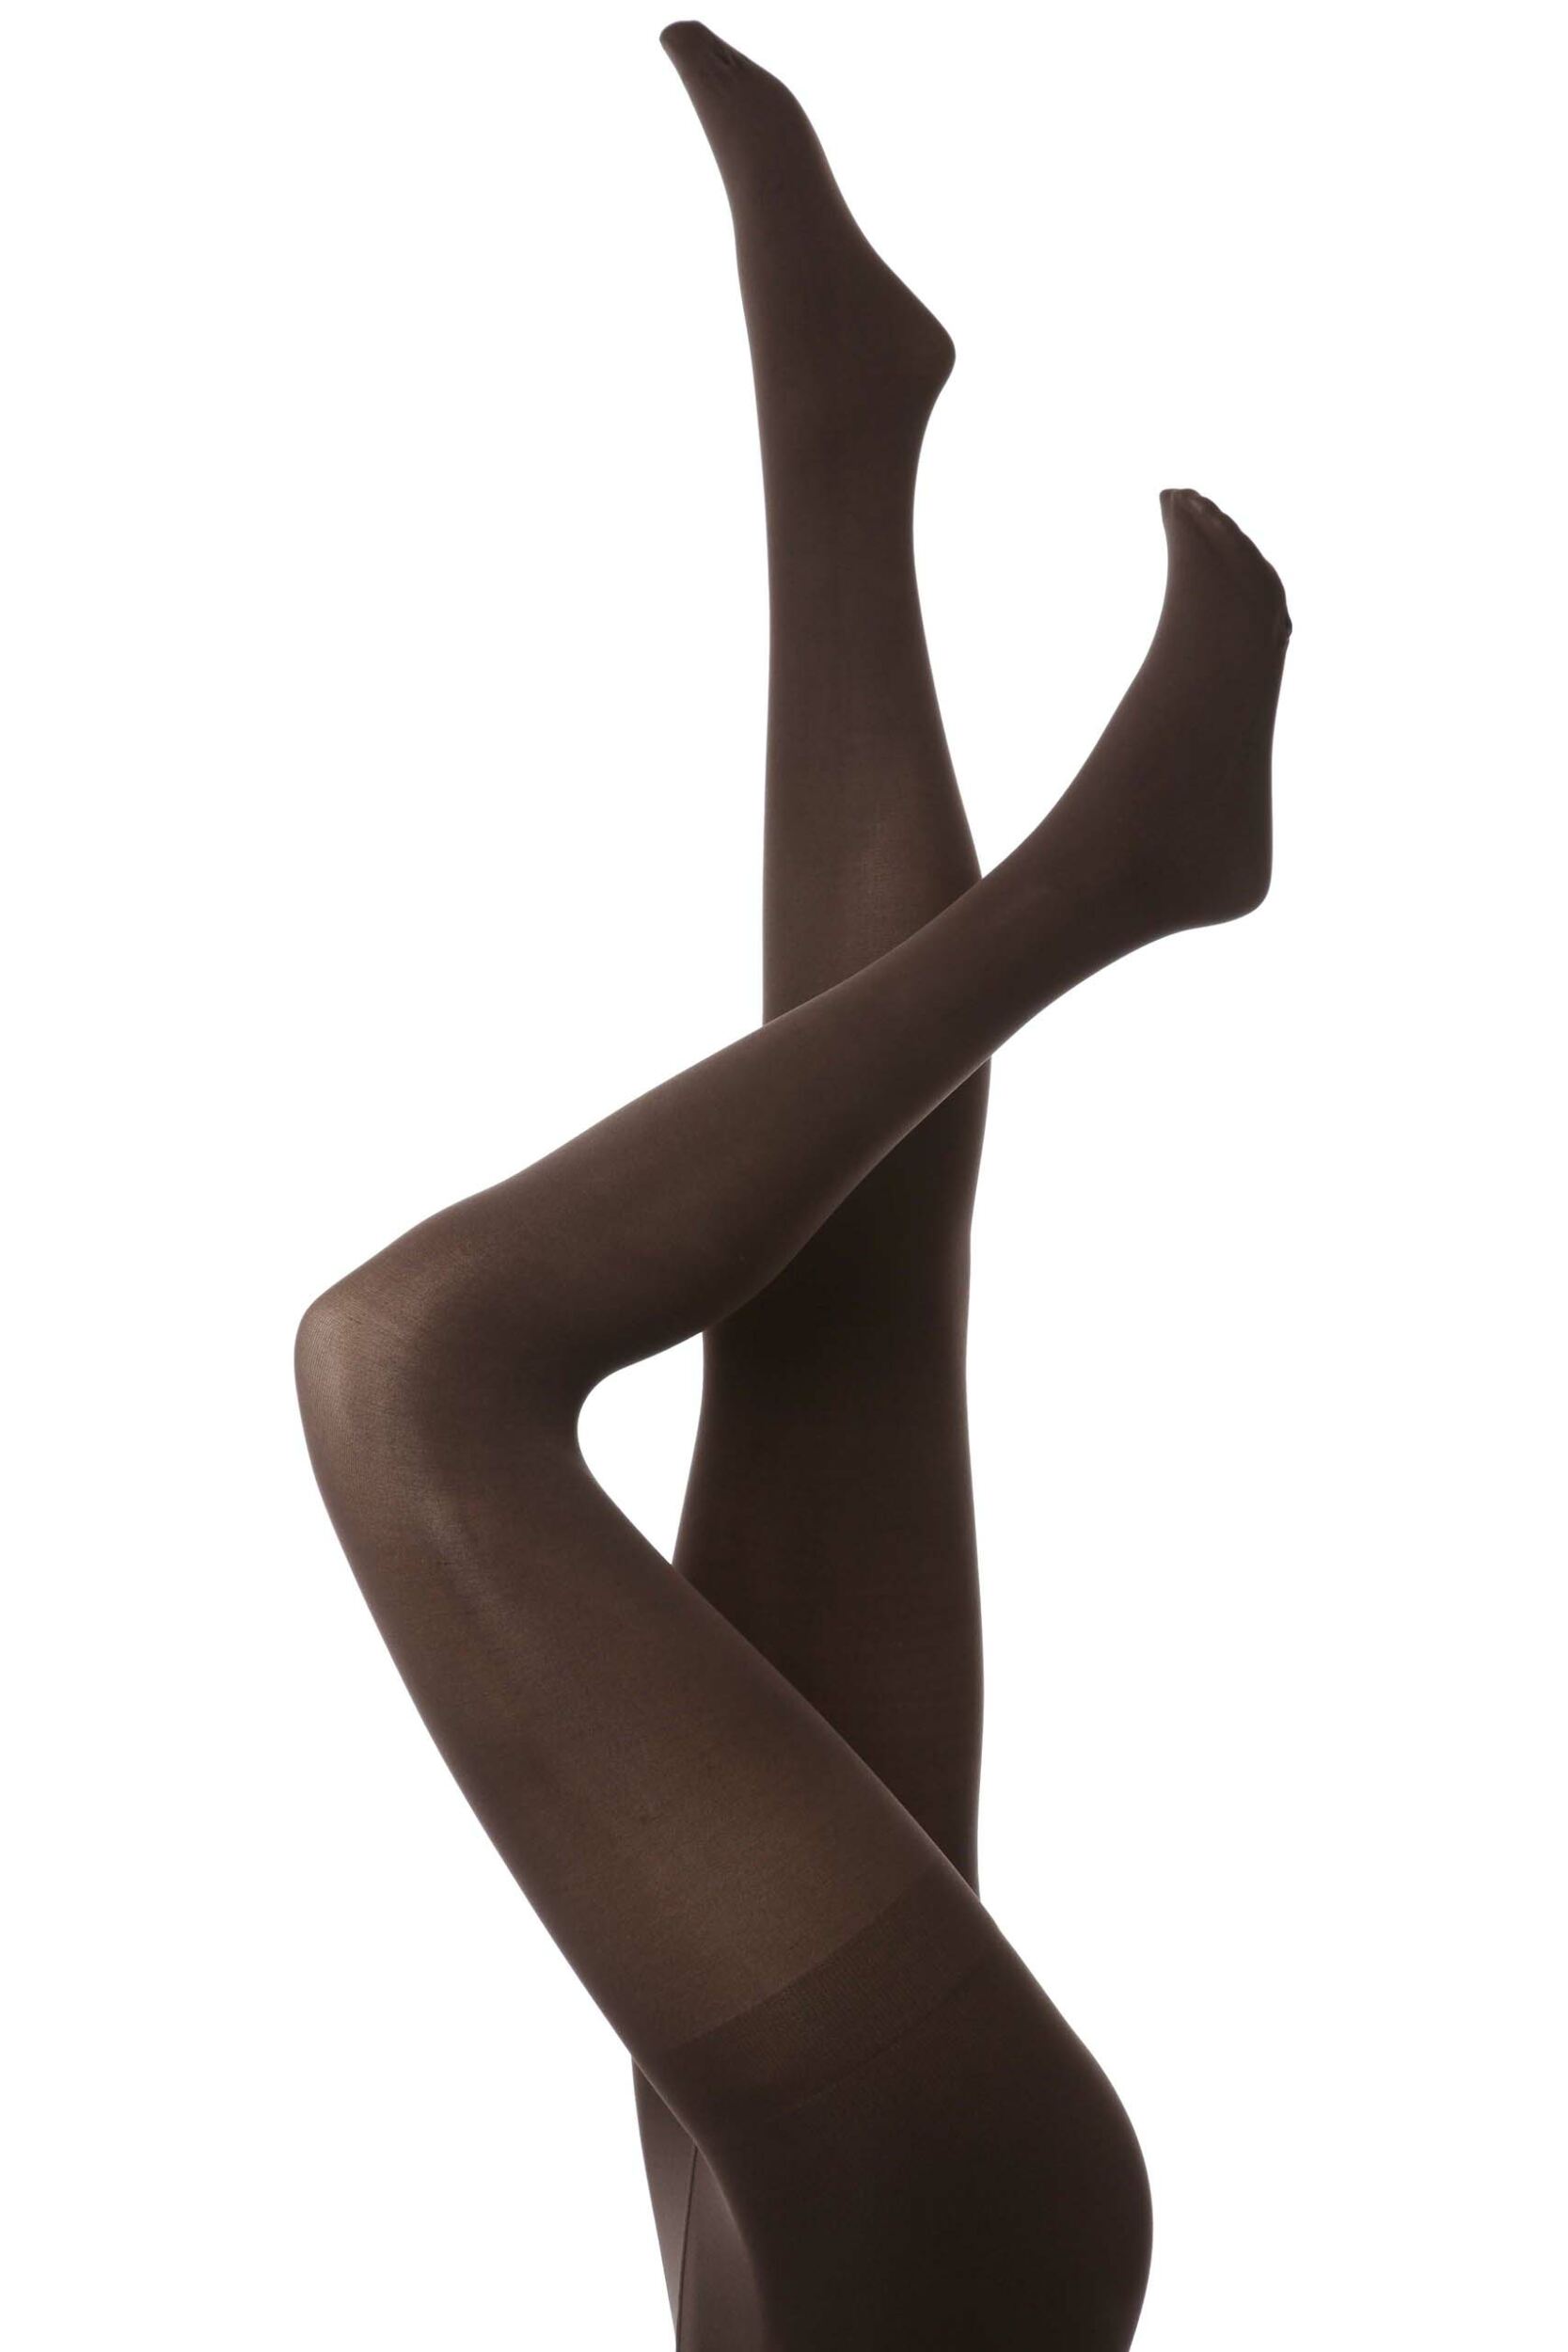 Charnos Flower Patterned Opaque Tights In Stock At UK Tights